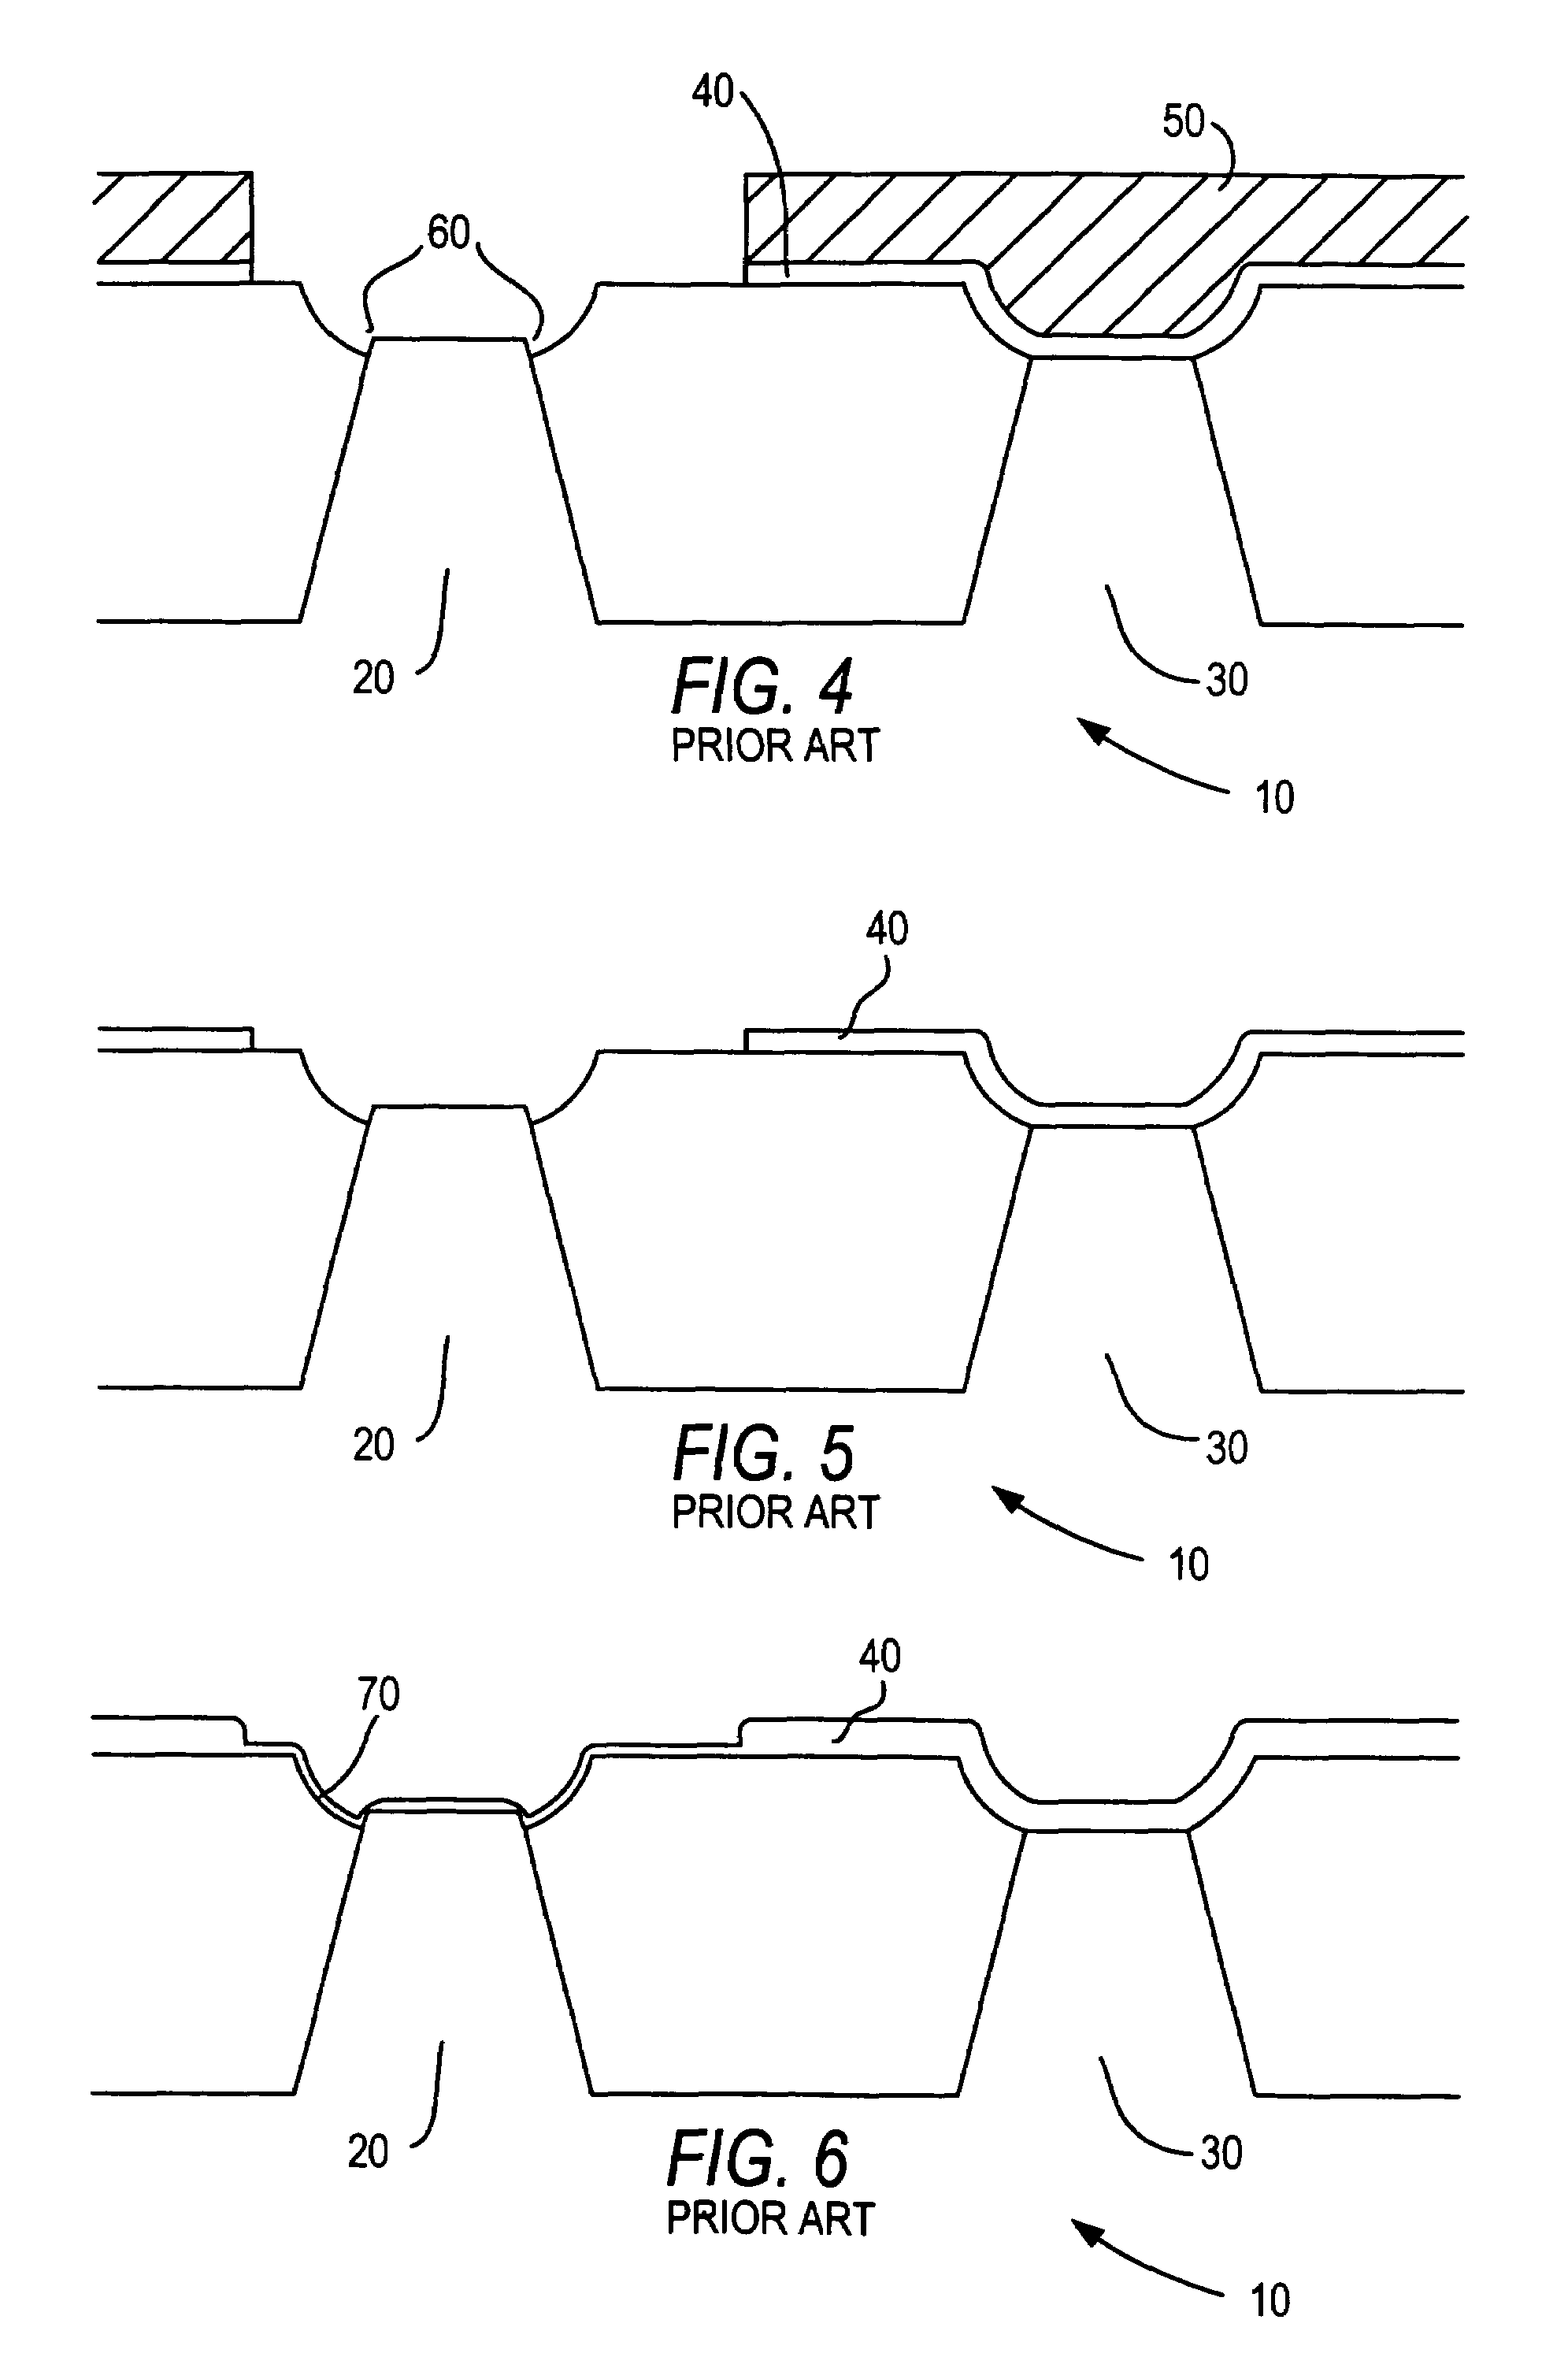 Reduction of field edge thinning in peripheral devices